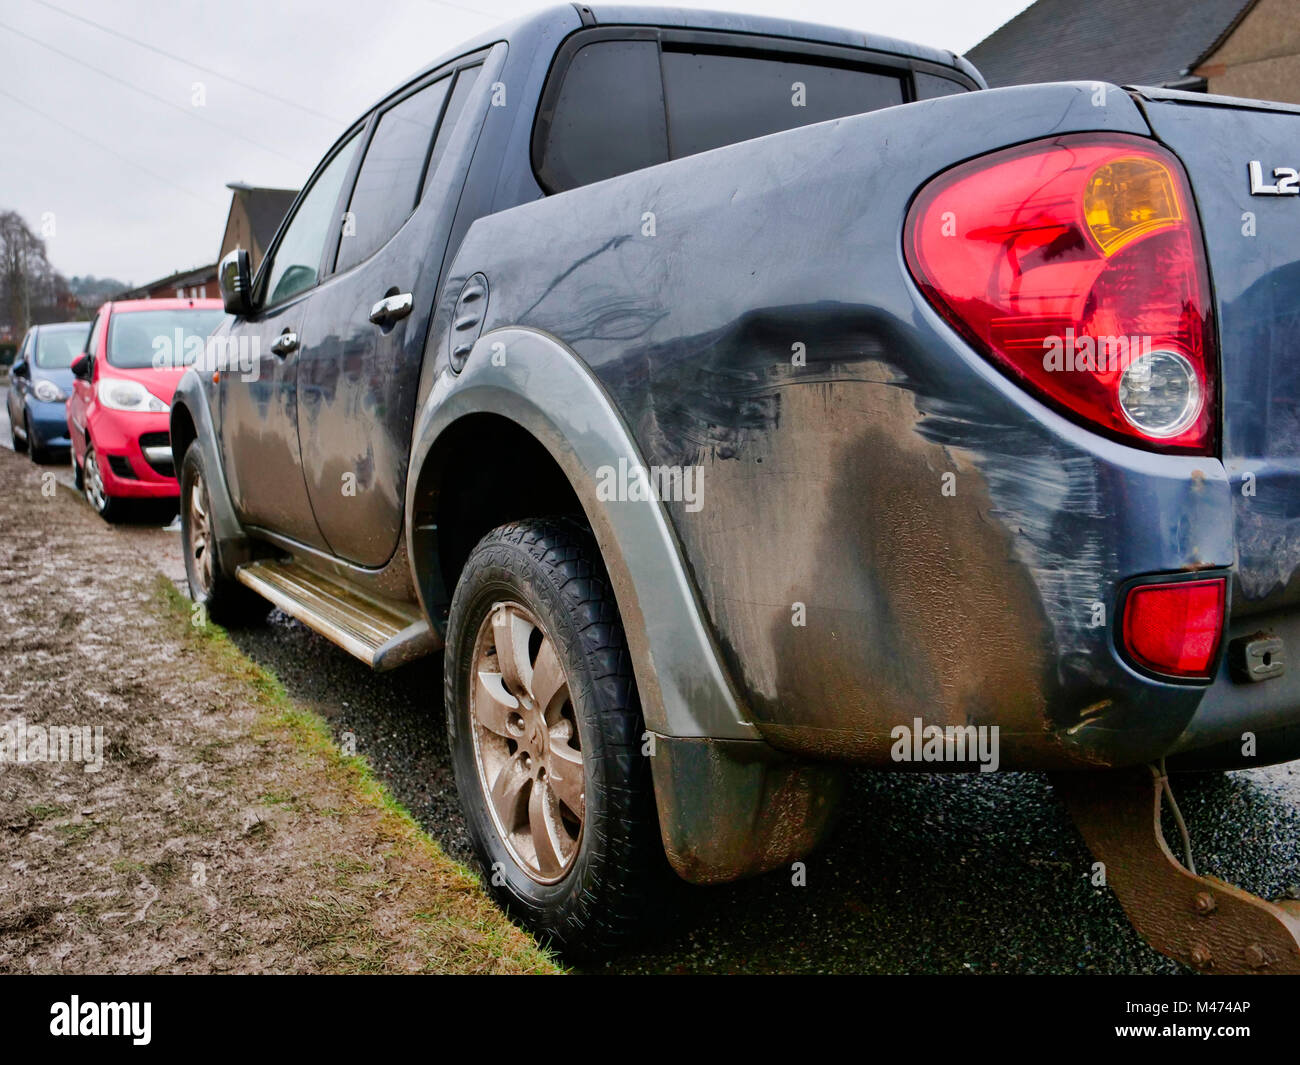 Cars damaged by the scrum during Ashbourne Royal Shrovetide hugball Football match Ash Wednesday 14th February 2018. Ye Olde & Ancient Medieval hugball game is the forerunner to football. It's played between two teams, the Up'Ards & Down'Ards separated by the Henmore Brook river. The goals are 3 miles apart at Sturston Mill & Clifton Mill. Stock Photo